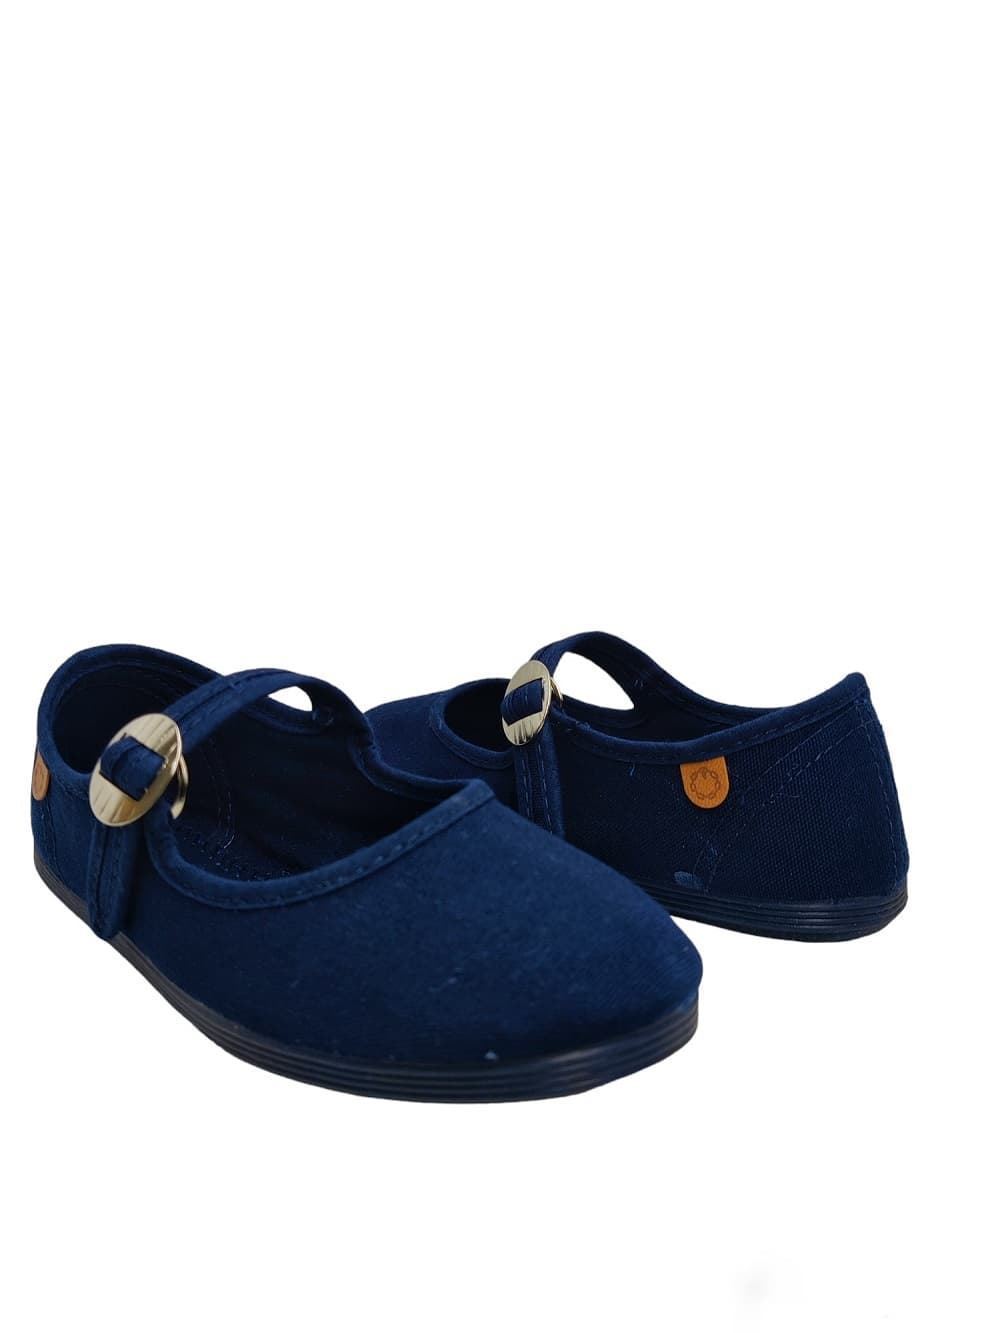 The Merceditas Chain for girls Navy Blue Canvas - Image 1